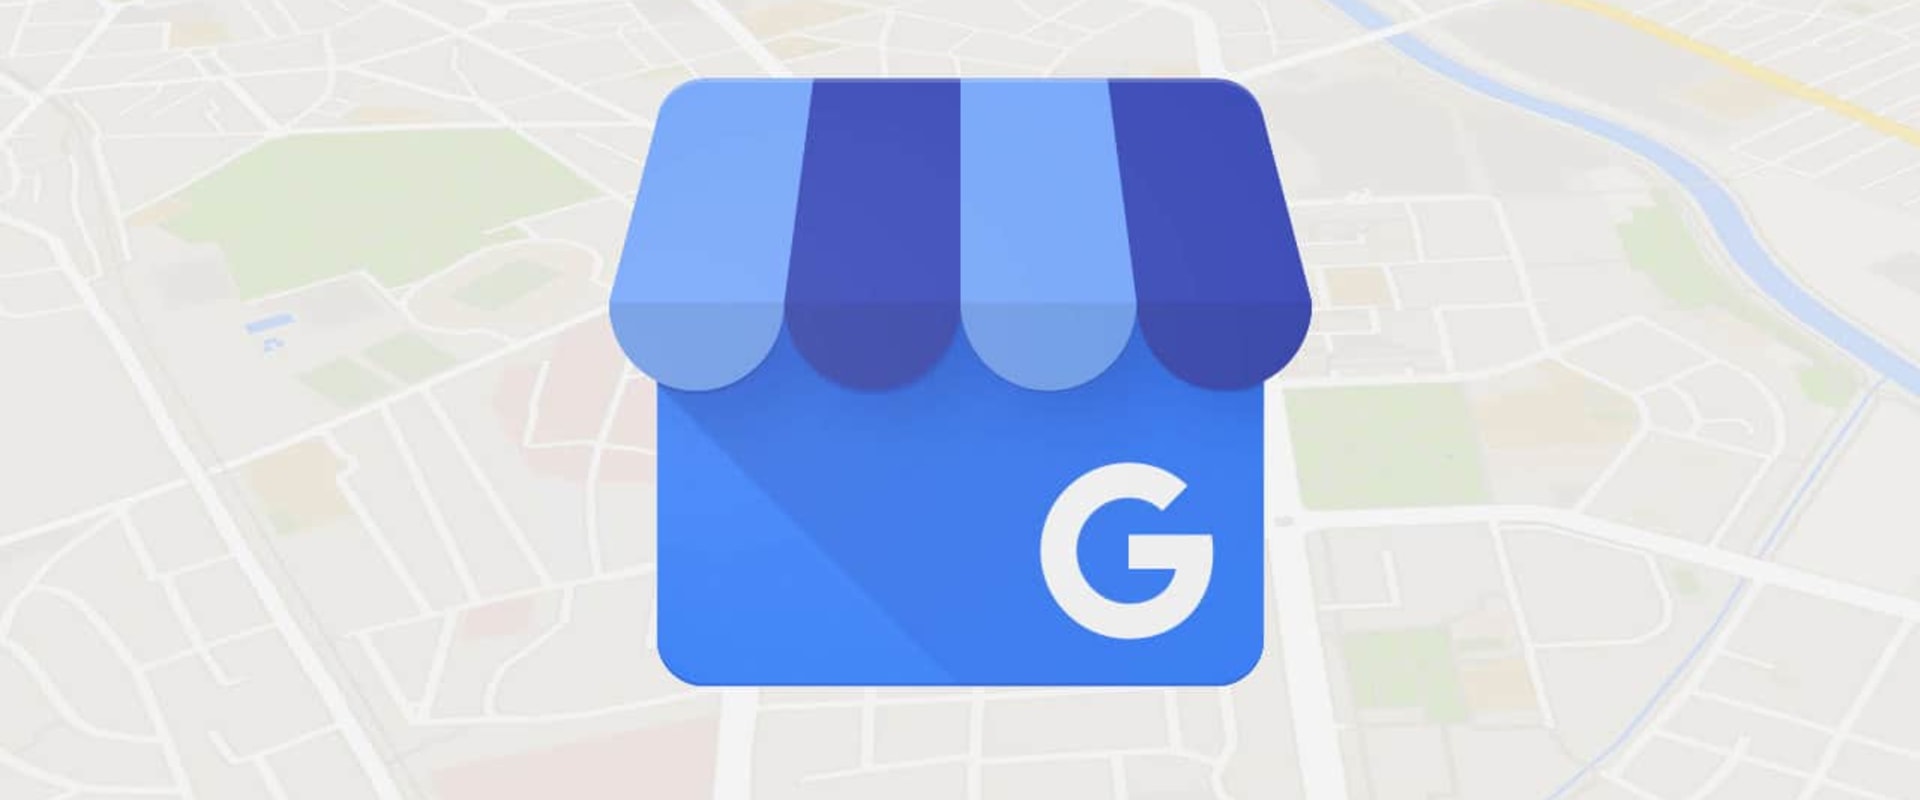 How do i add a phone number to my google for my business listing?